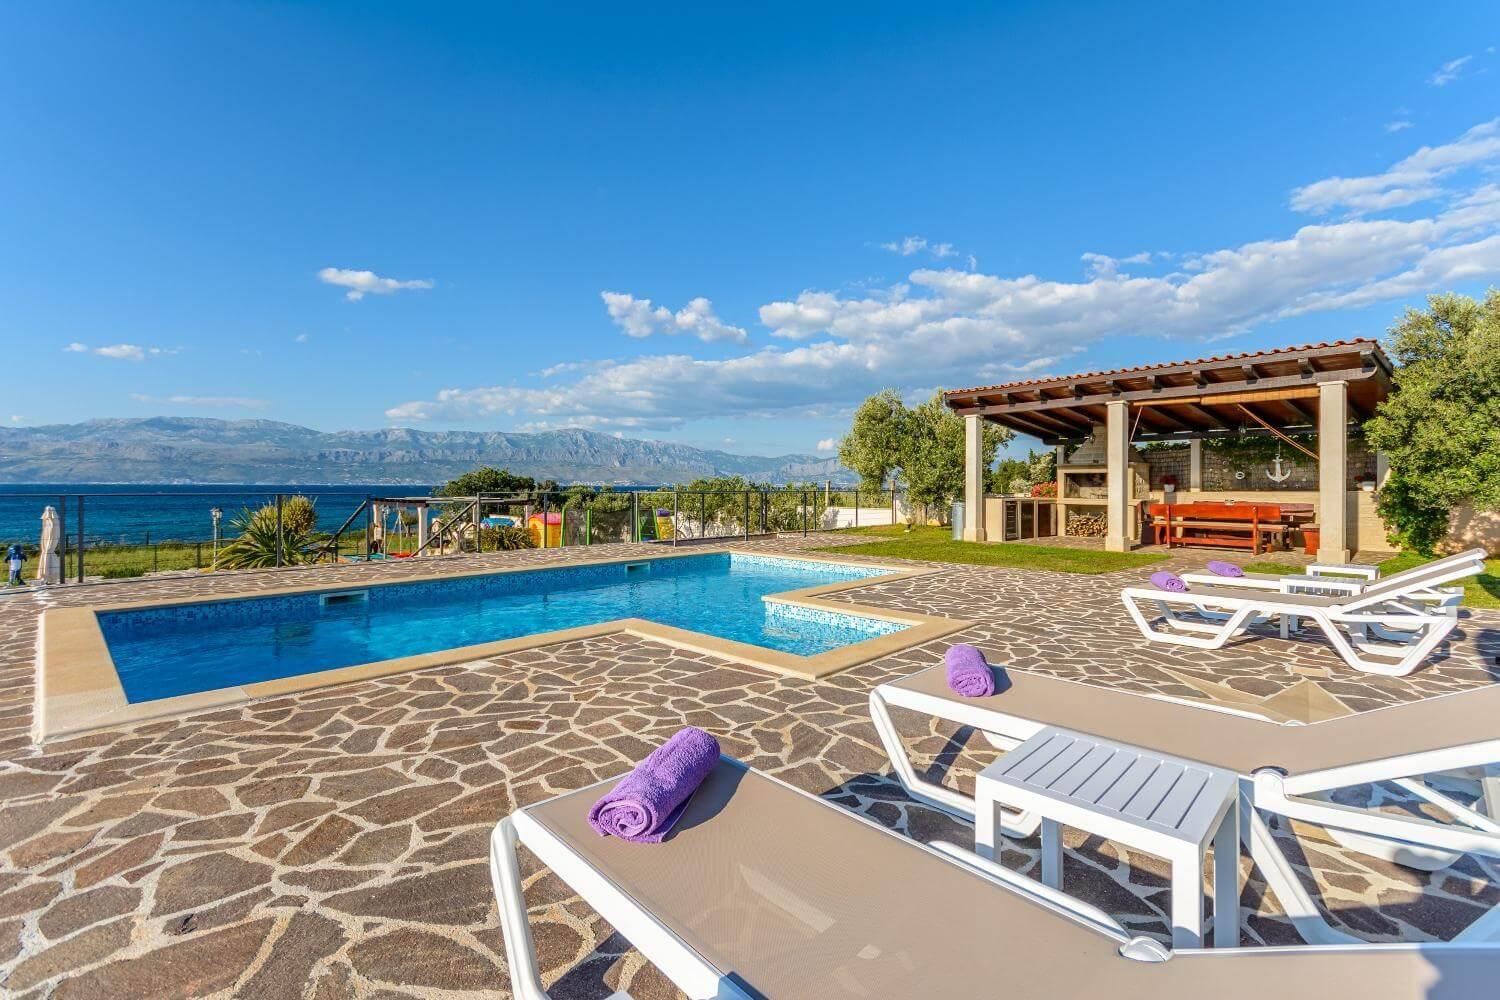 Top 5 Villas in Croatia for Family Holidays